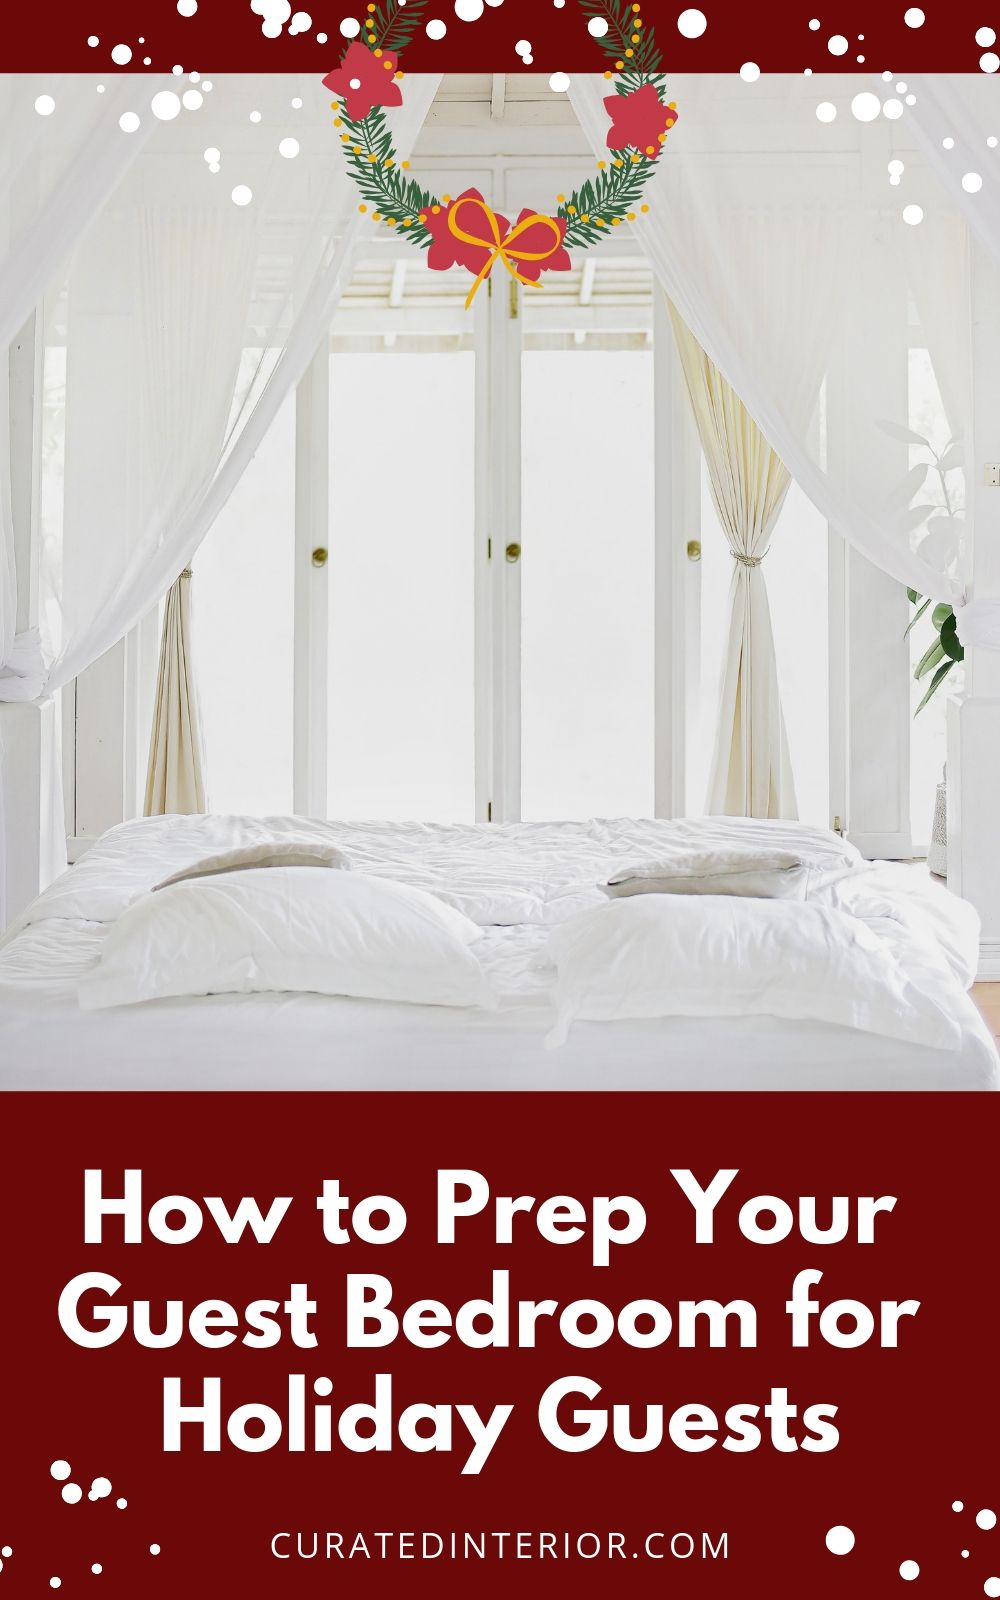 How to Prep Your Guest Bedroom for Holiday Guests